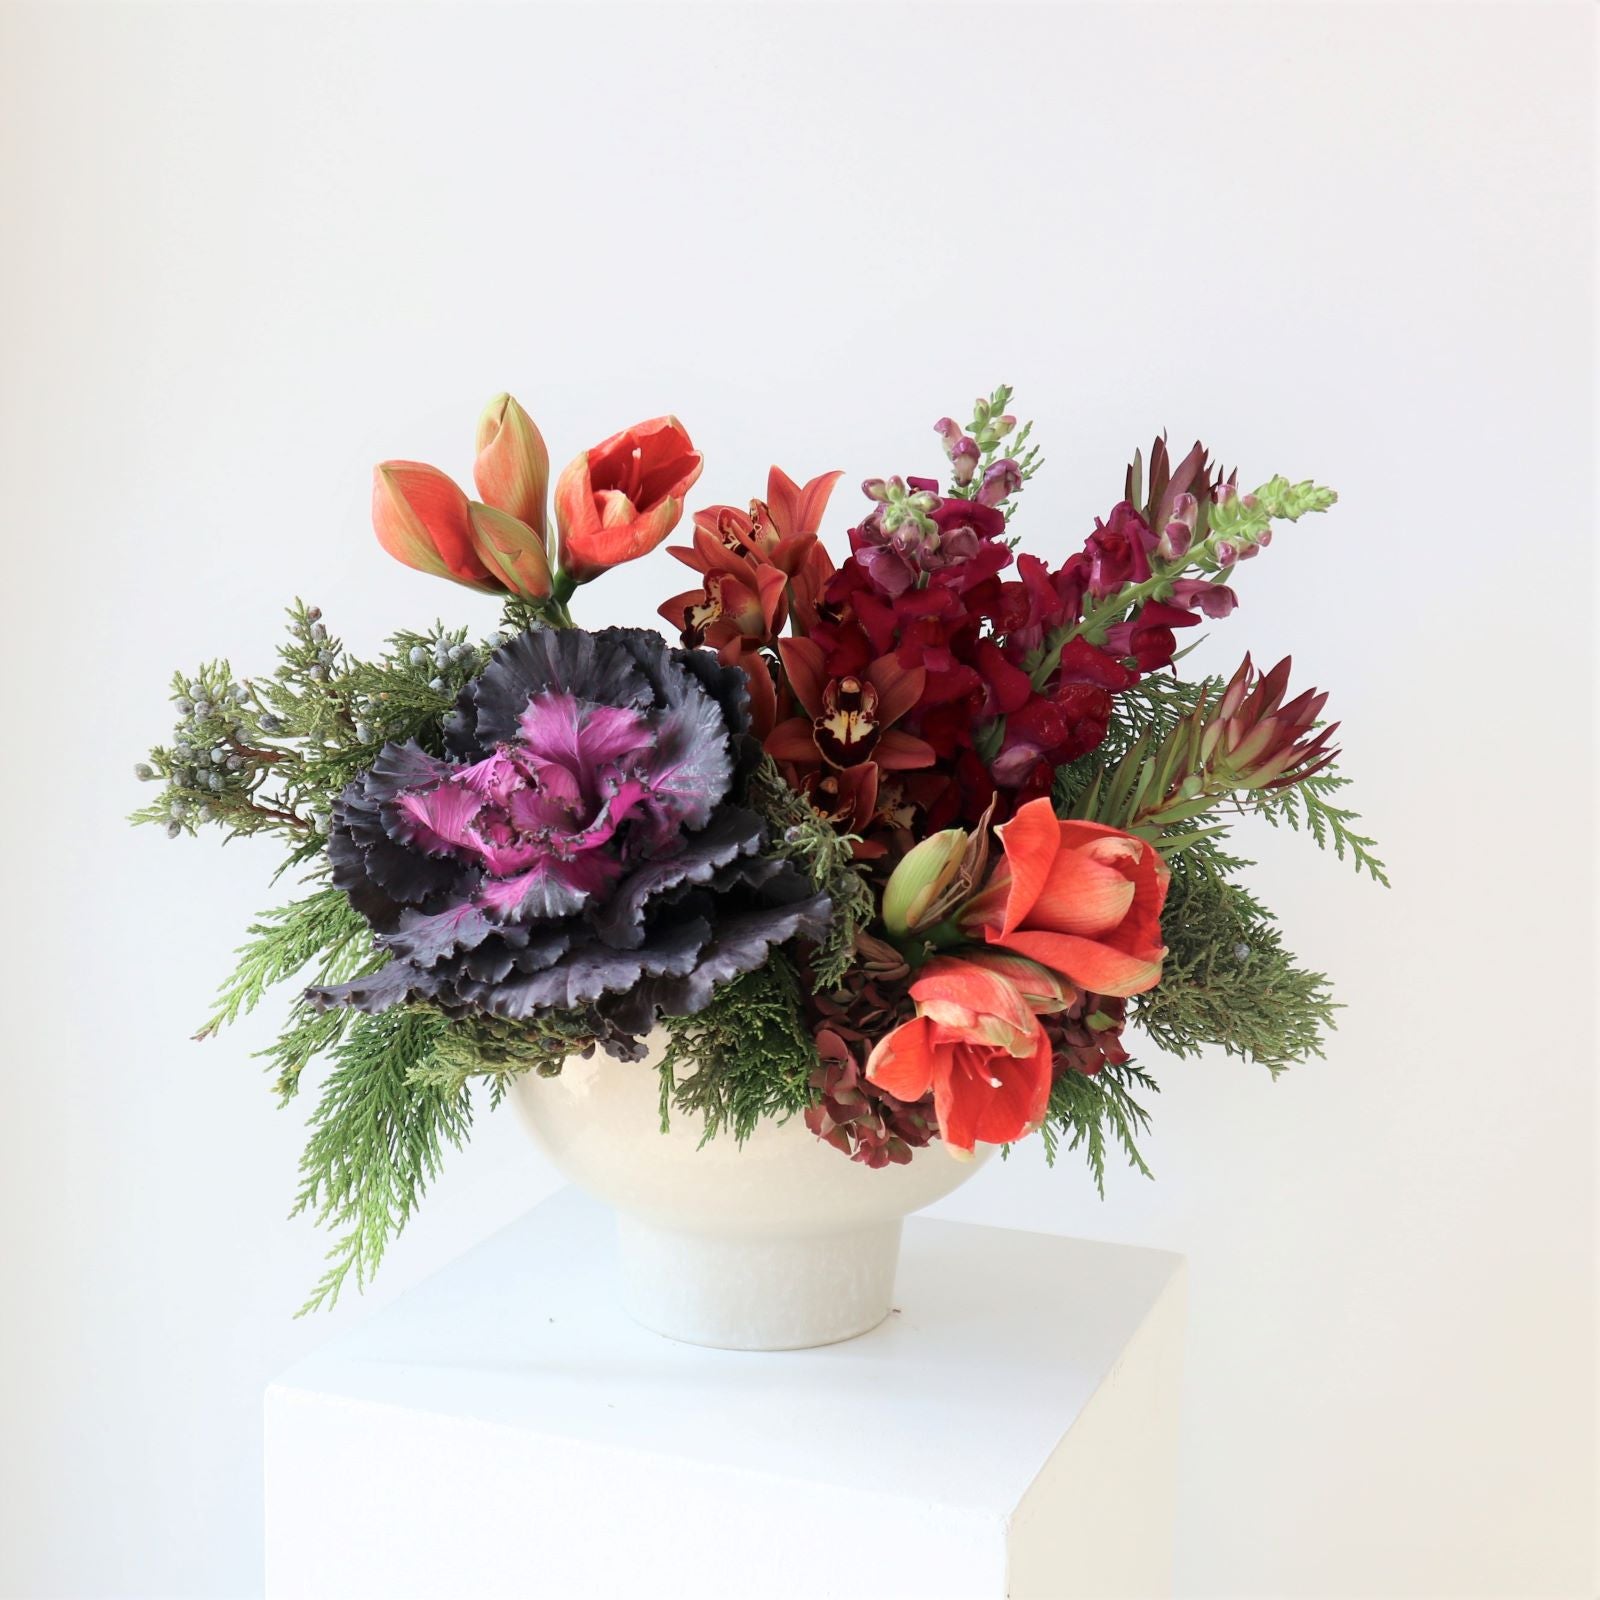 colorful winter green arrangement with kale and orchids and amarylis